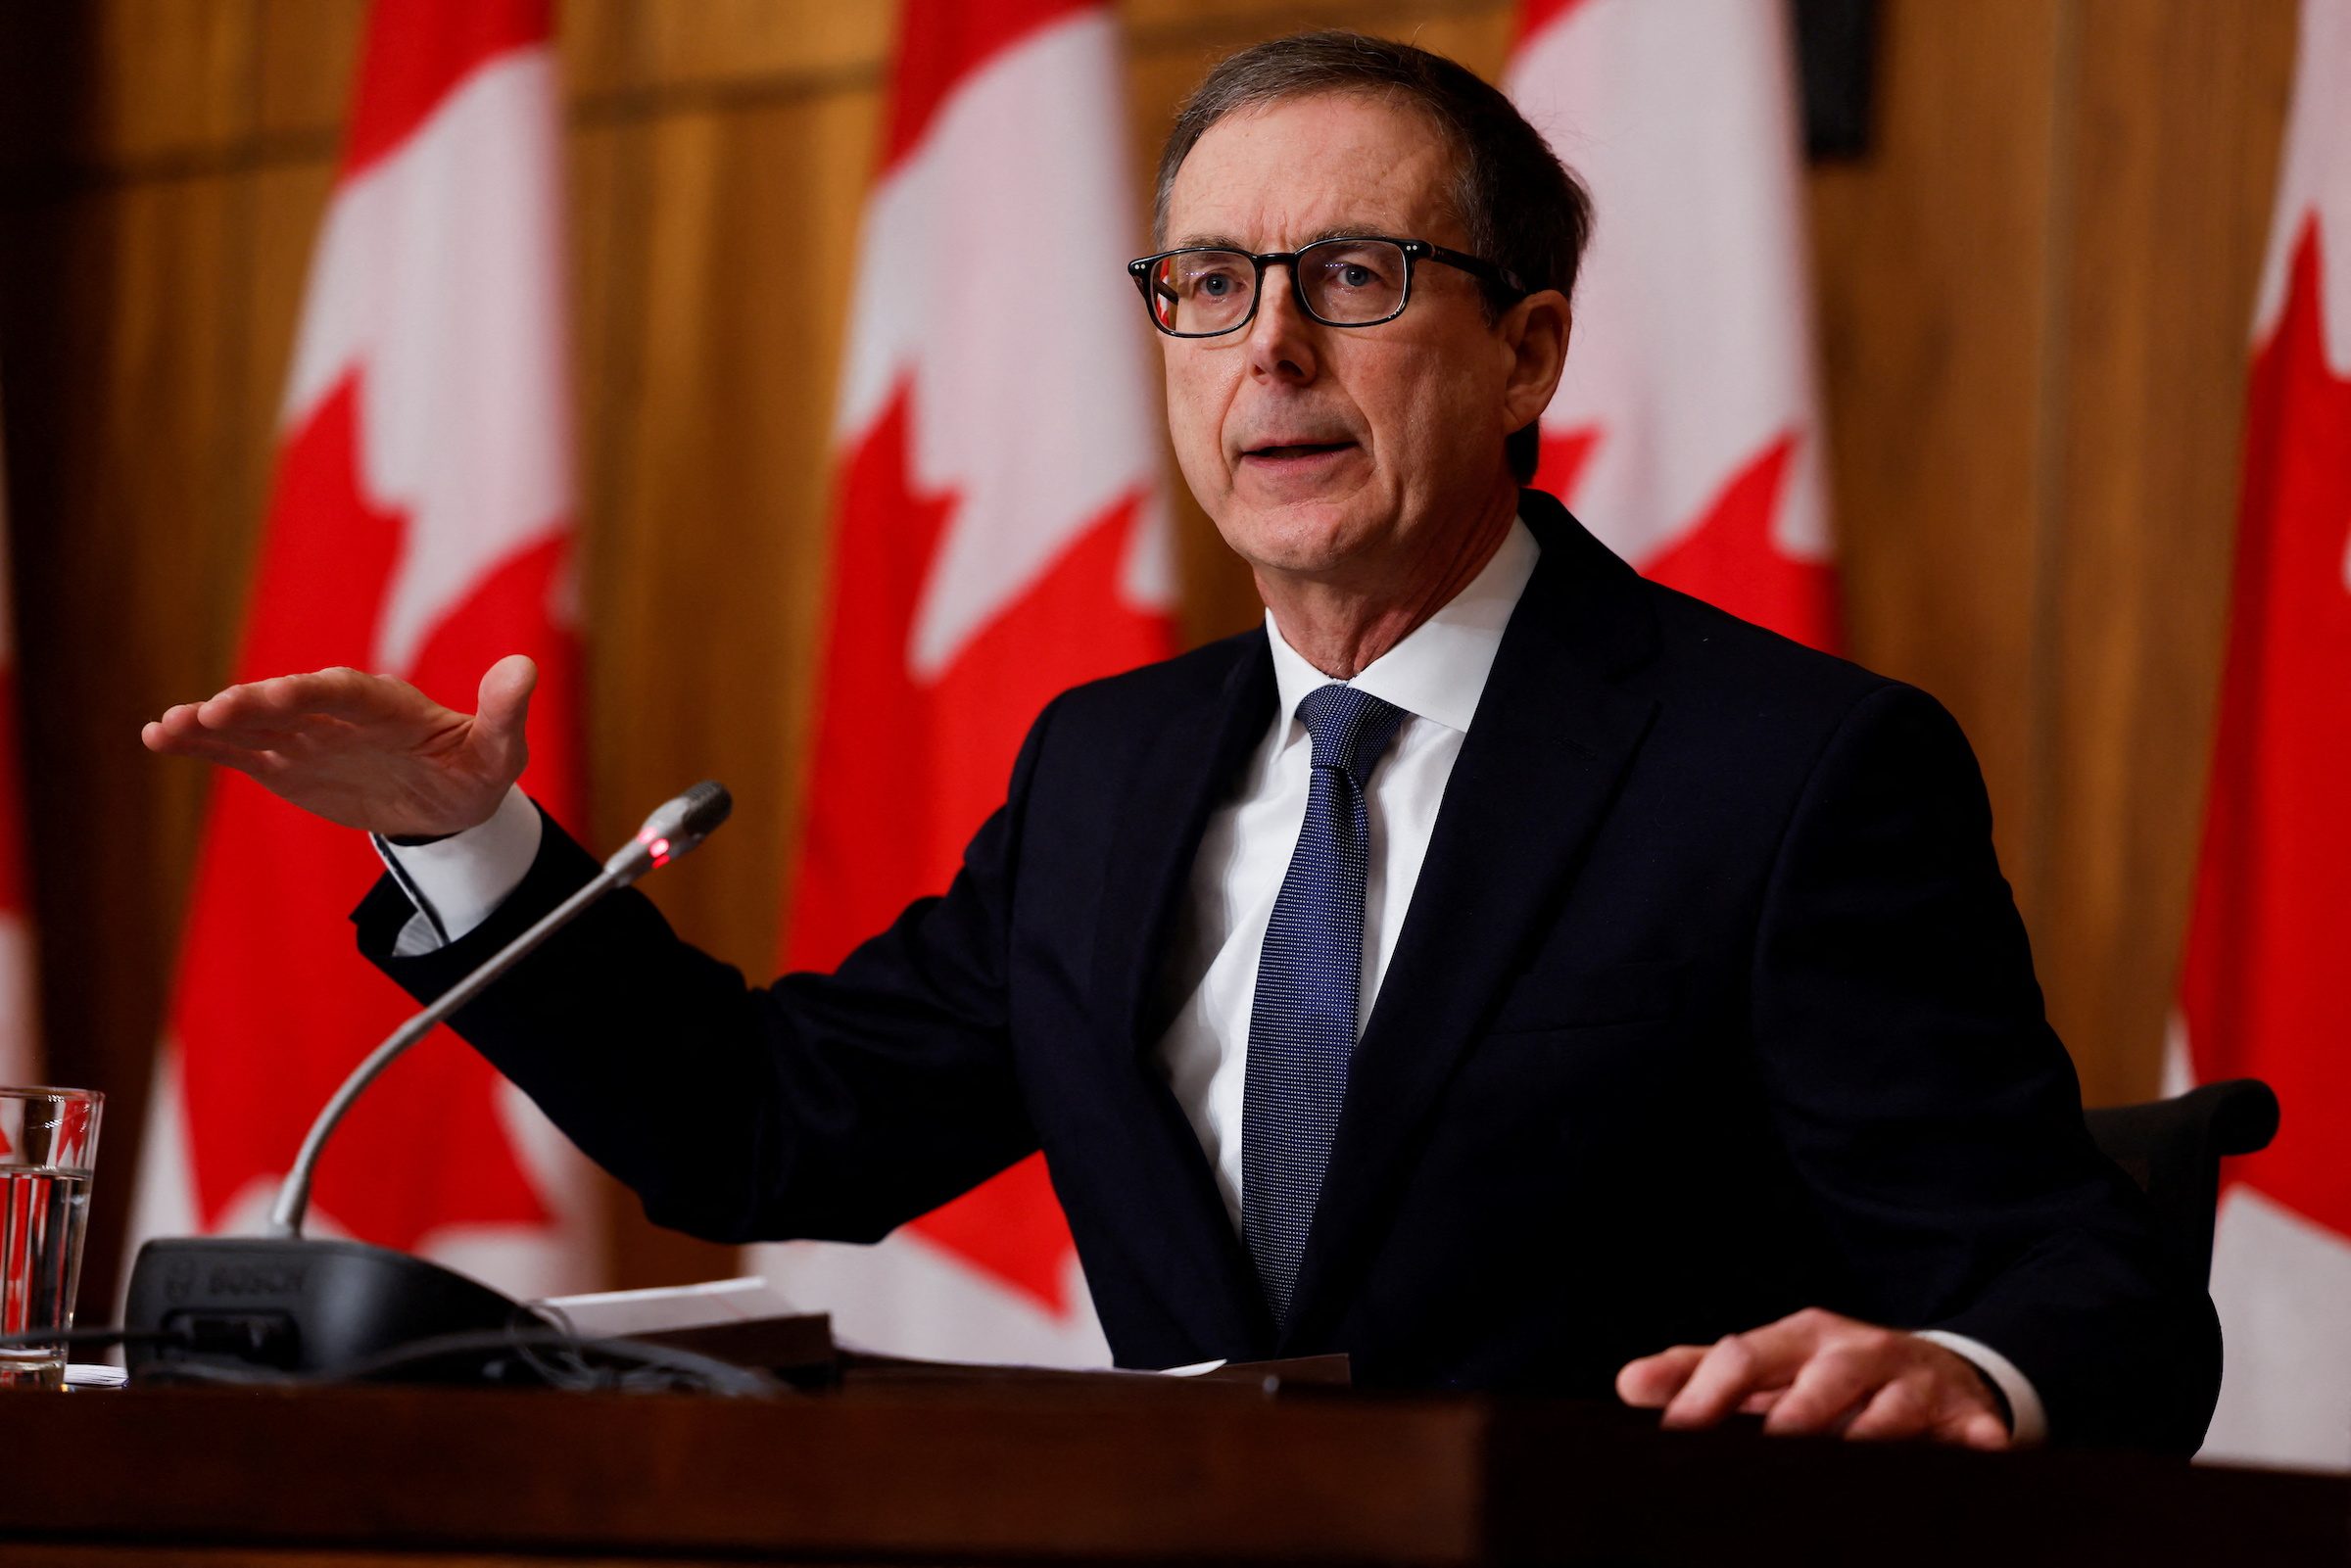 Bank of Canada keeps 2% inflation target, adds labor market factors to mix